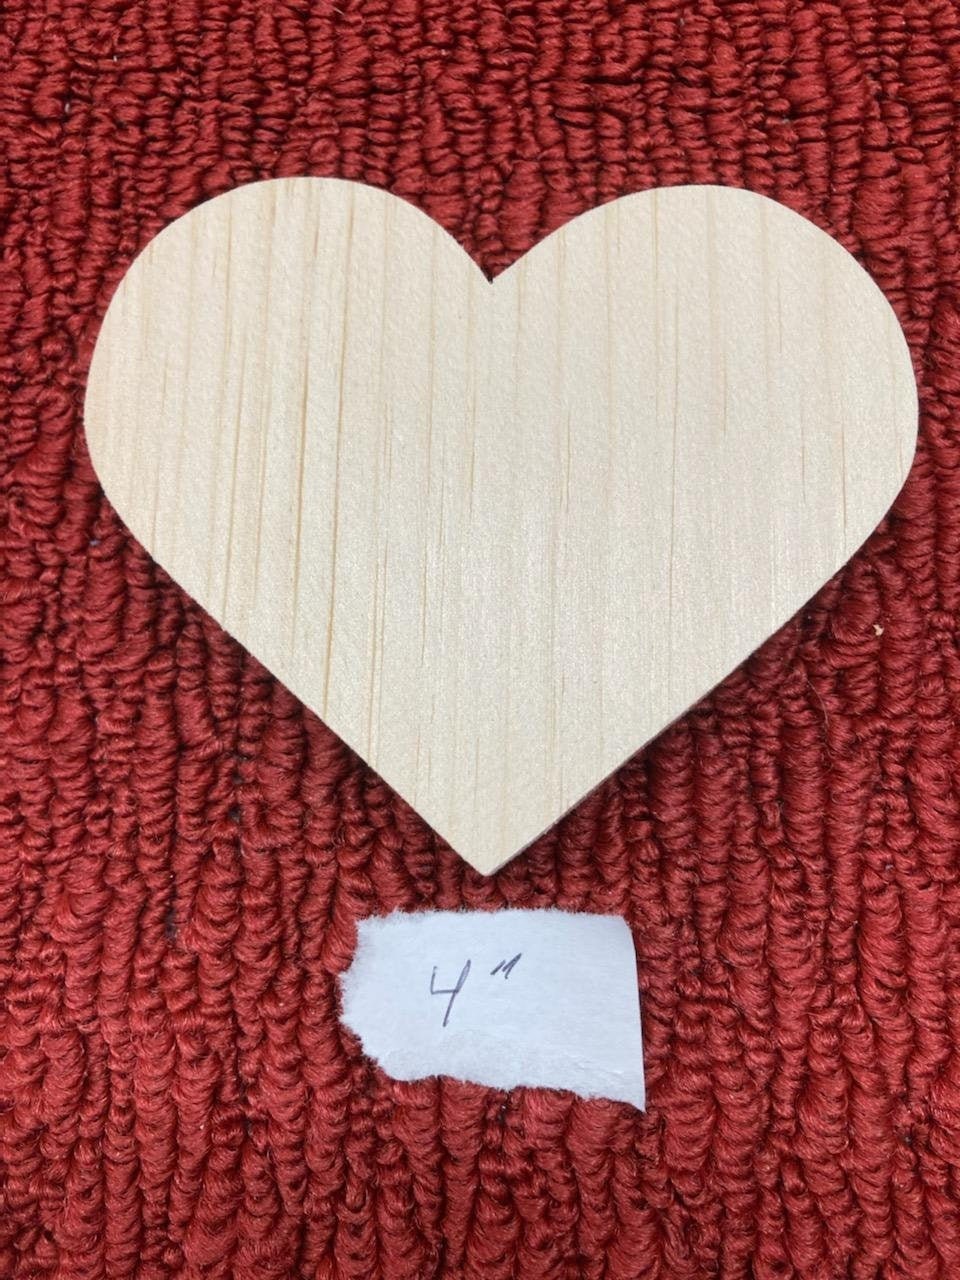  KEILEOHO 100 PCS 3 Inch Wood Heart Cutouts, Unfinished Wood  Hearts, Plain Wooden Hearts Blank Heart Shaped Wooden Slices for Crafts,  Tags, DIY, Decoration